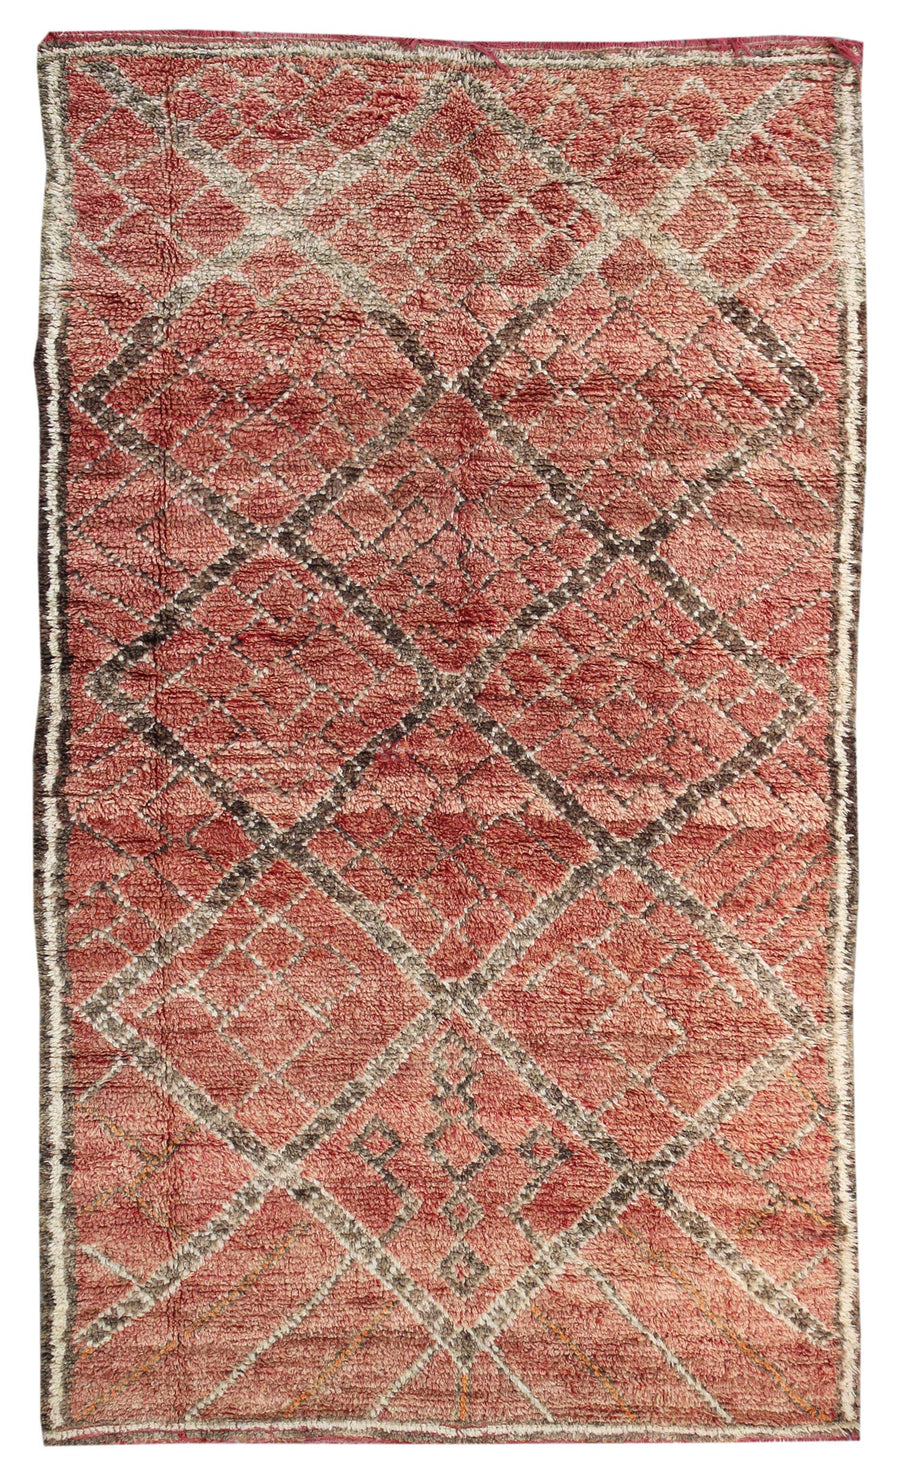 MOROCCAN HANDKNOTTED RUG, 61919